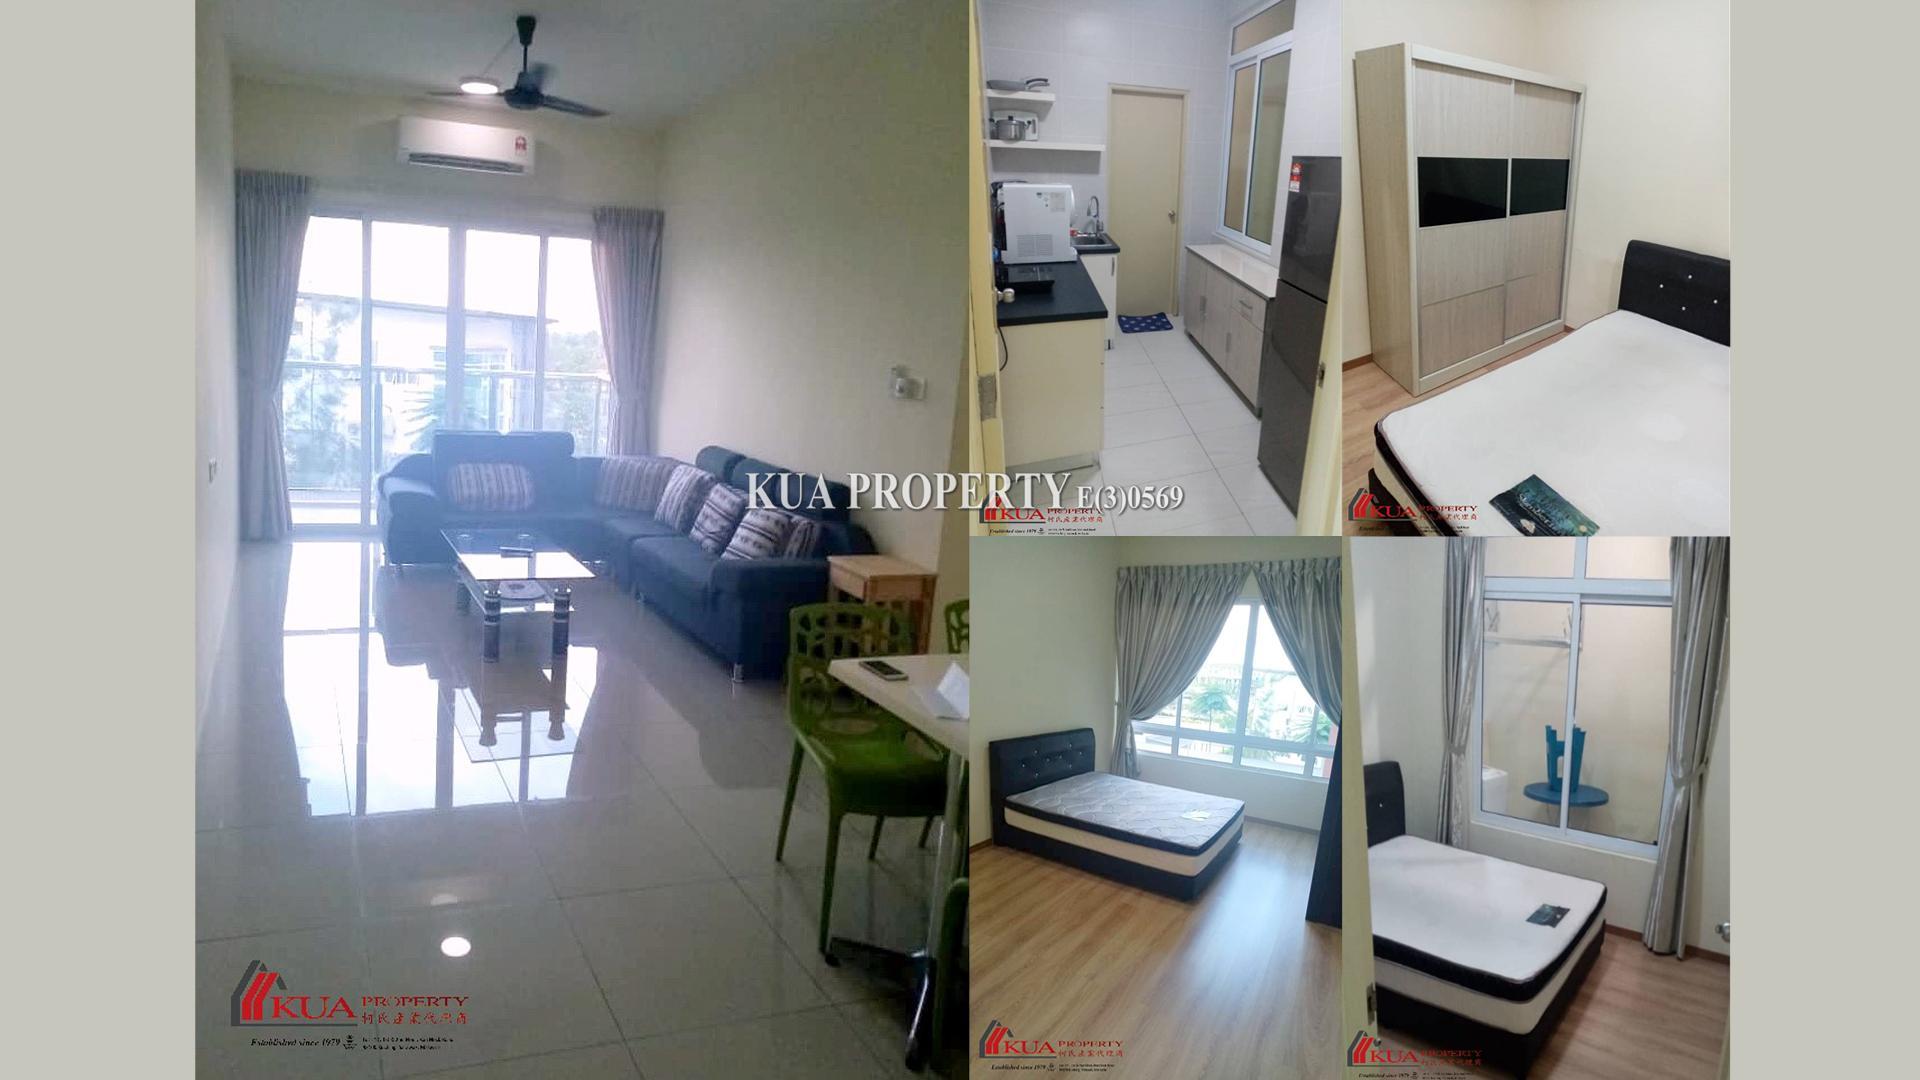 P Residence Apartment For Sale & For Rent! Located at Batu Kawa, Kuching